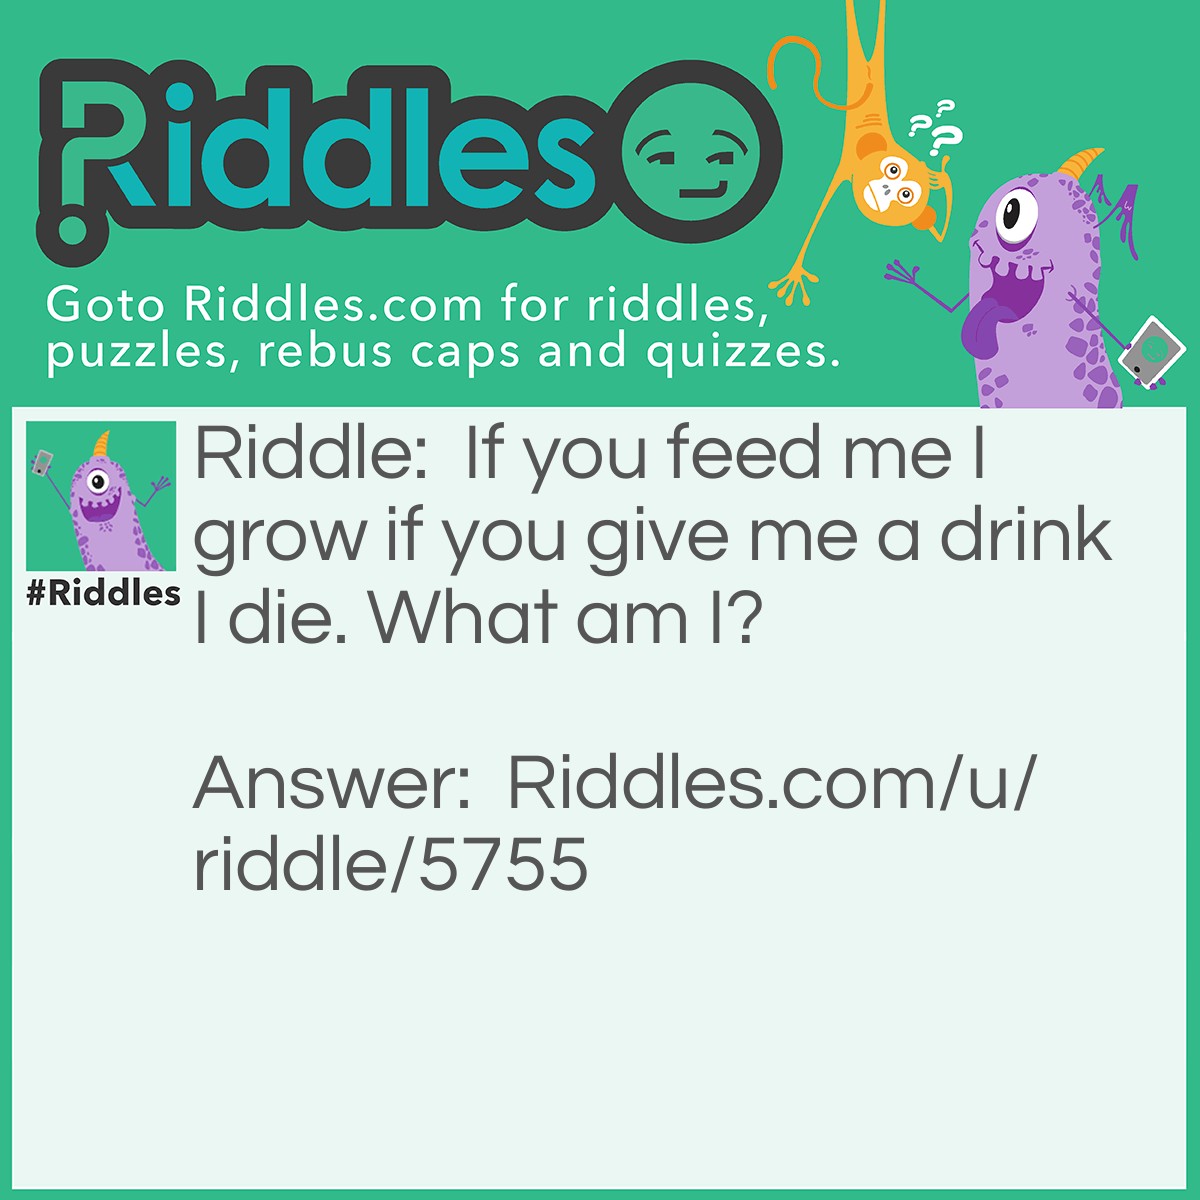 Riddle: If you feed me I grow if you give me a drink I die. What am I? Answer: Fire.